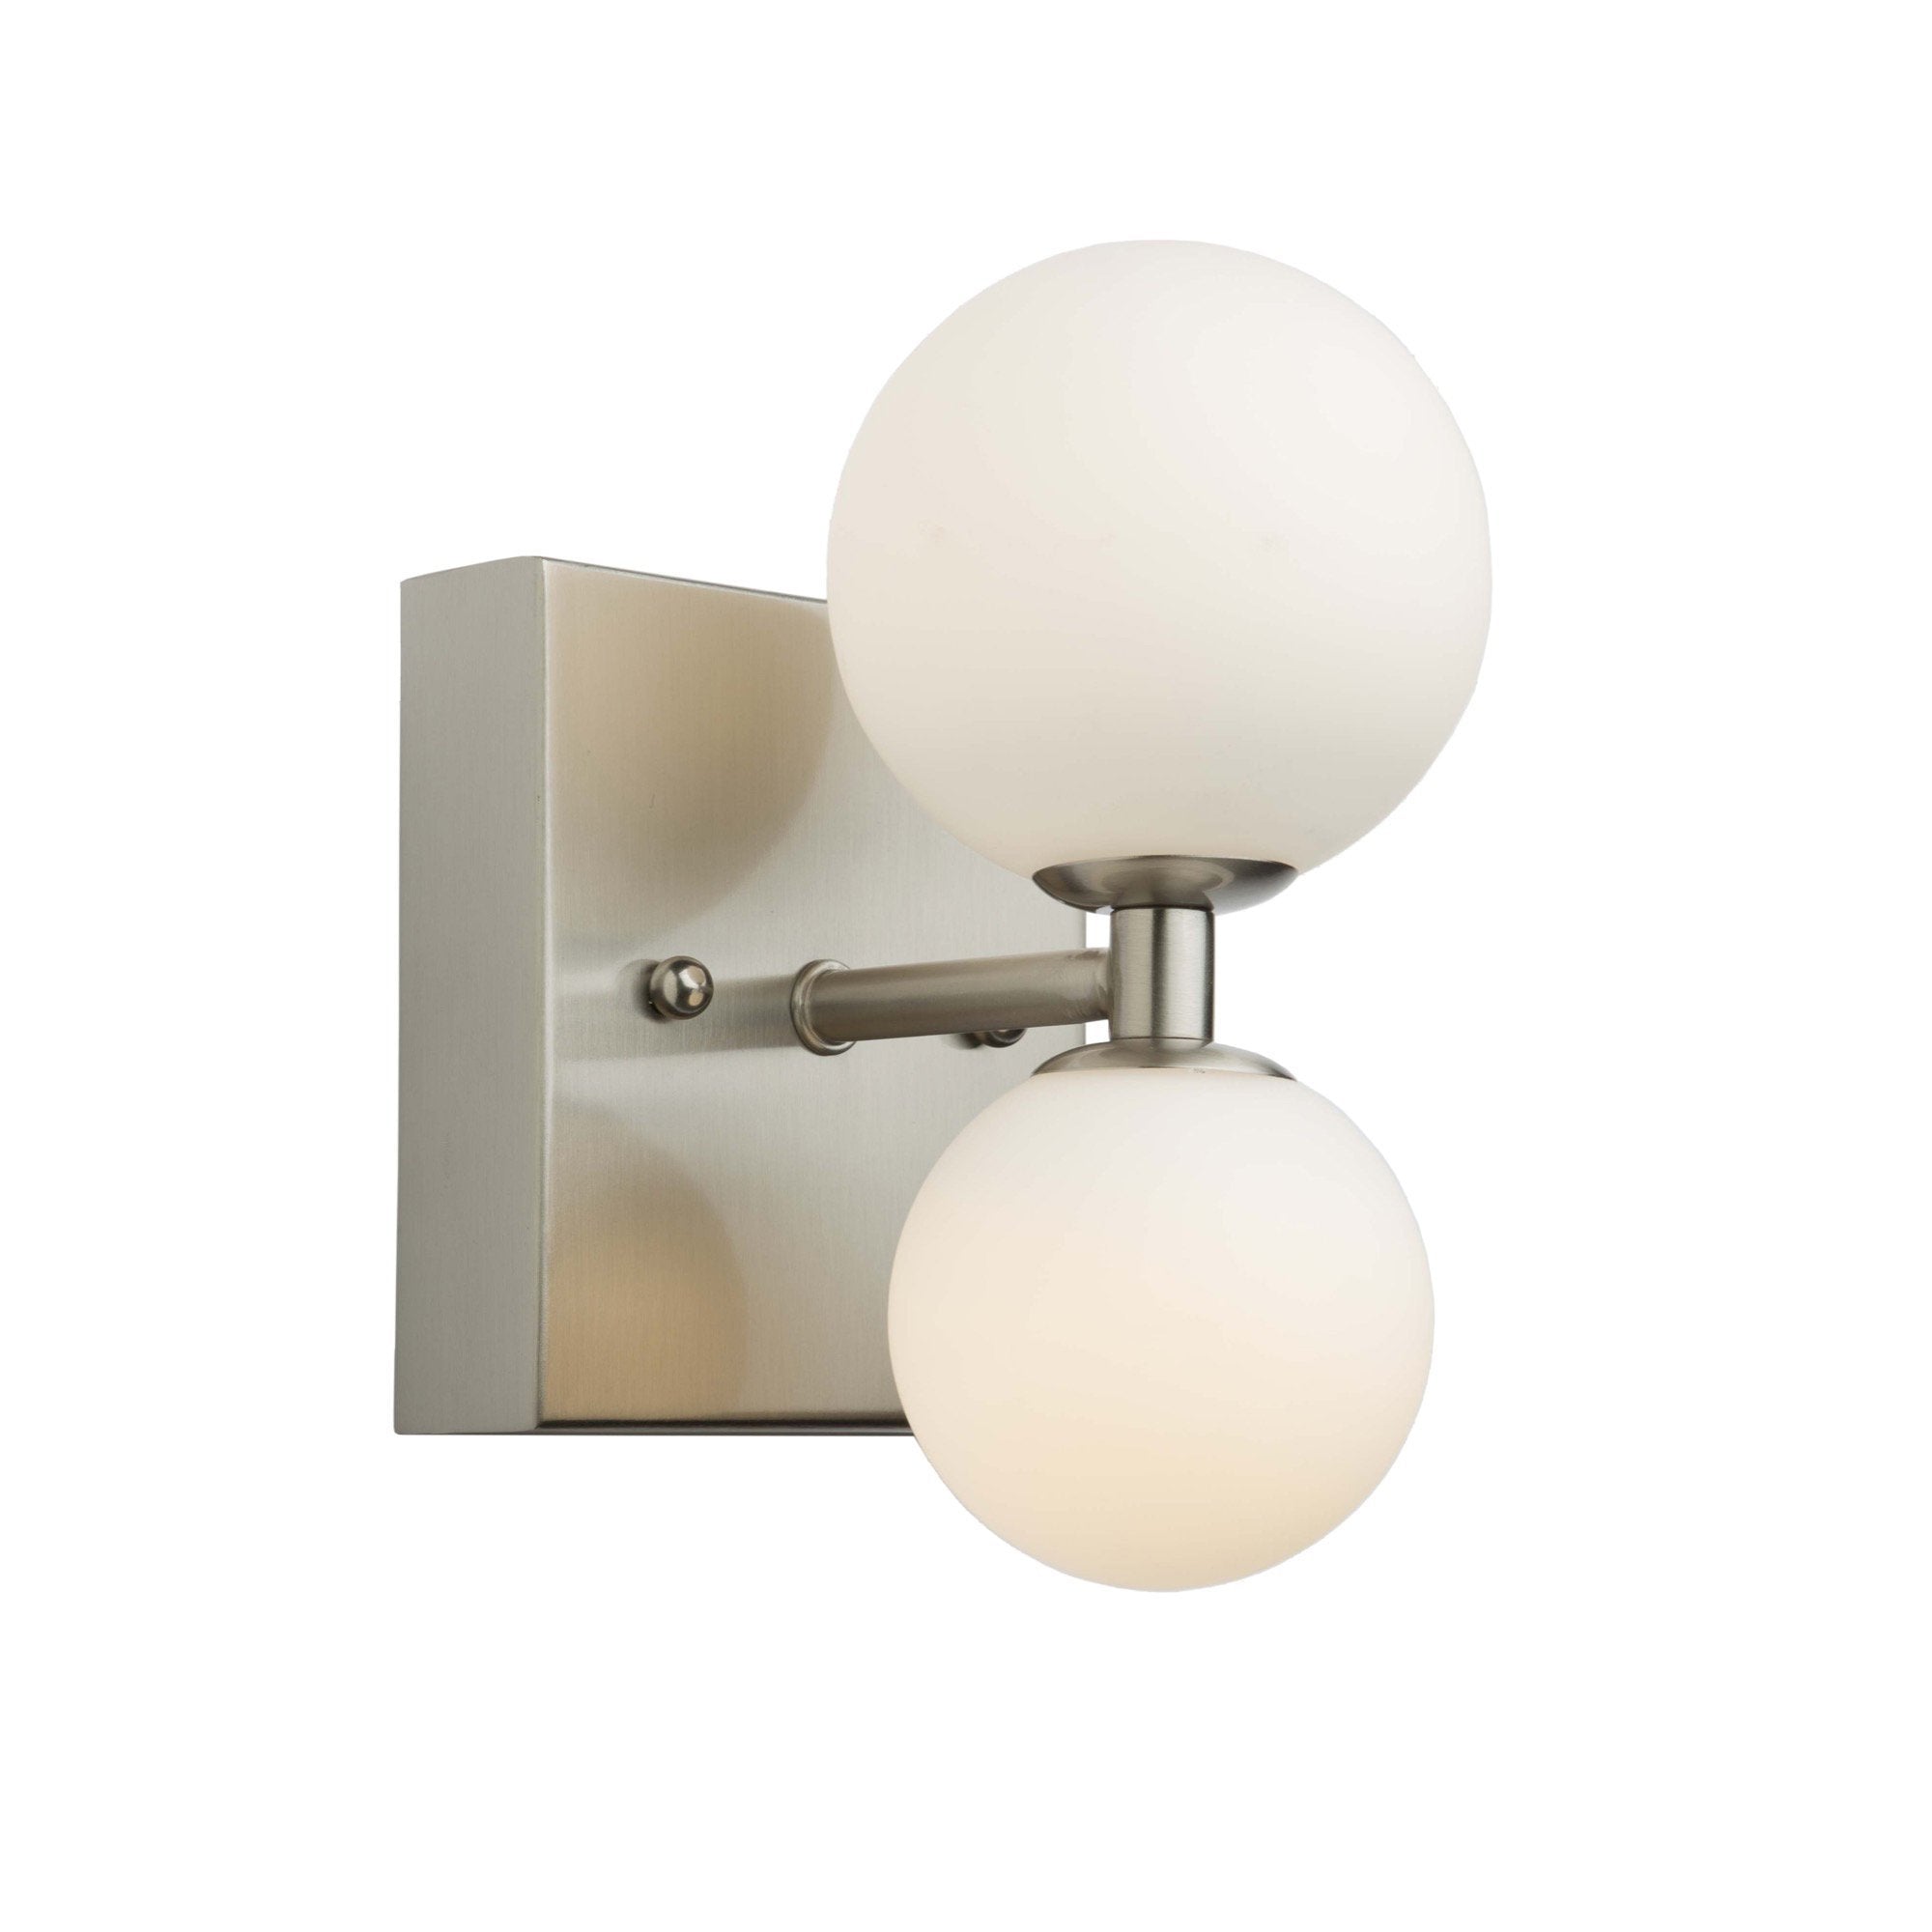 Hadleigh 5.25 in. wide Brushed Nickel Wall Light Wall Artcraft 